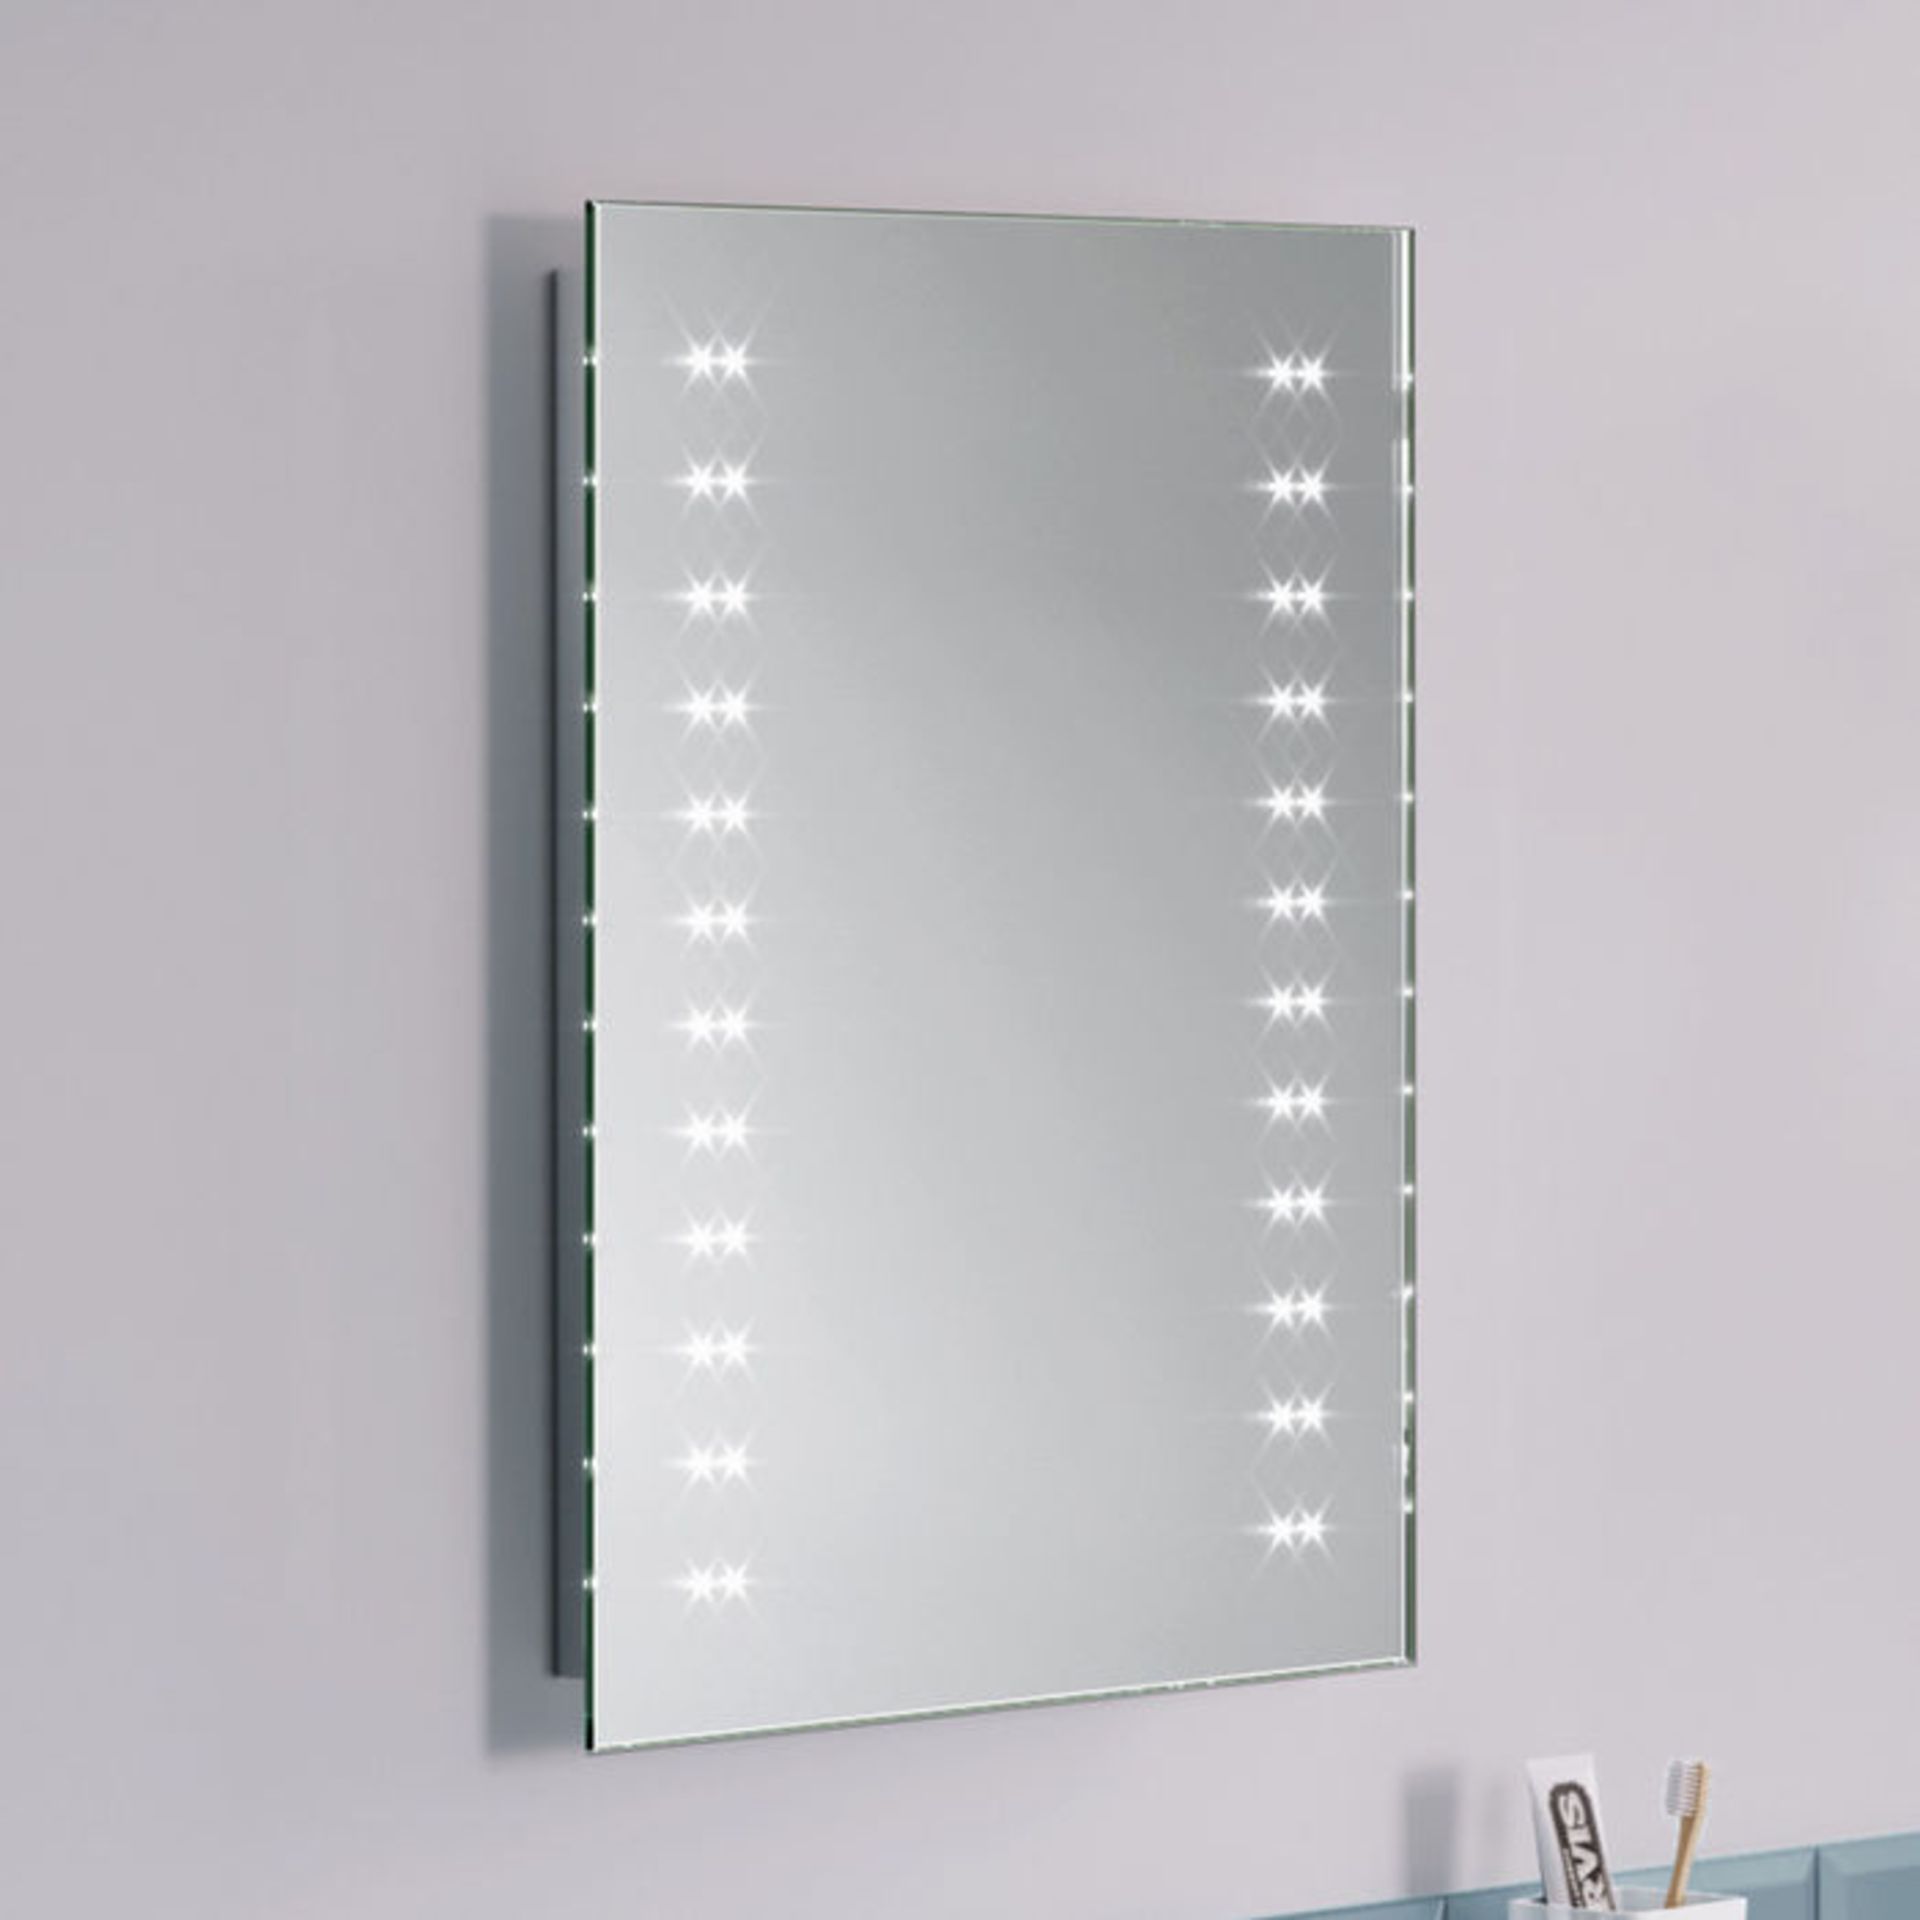 (GR111) 390x500mm Galactic LED Mirror - Battery Operated. Energy saving controlled On / Off switch - Image 2 of 3